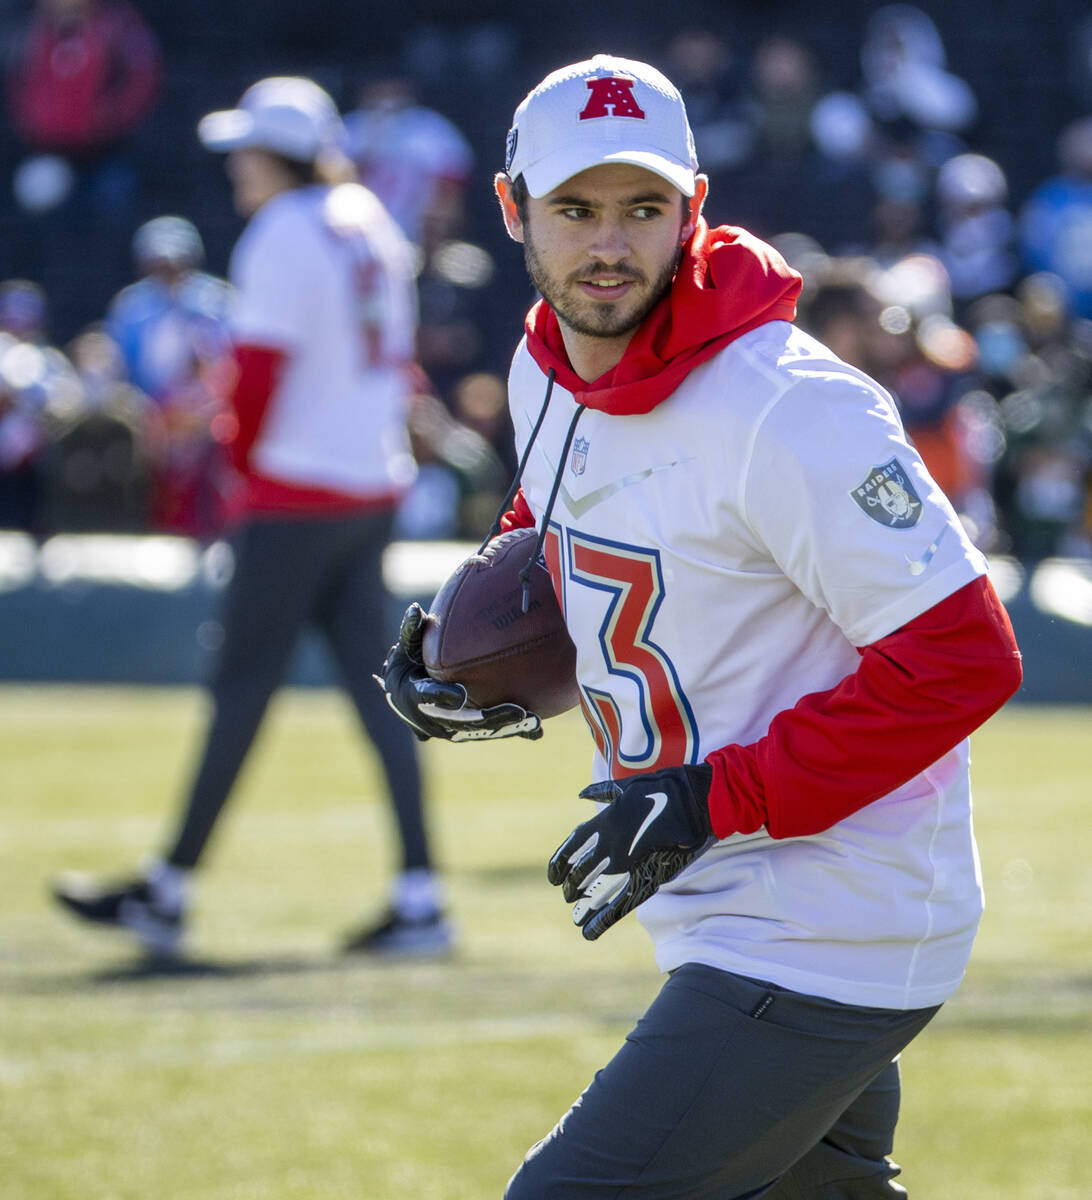 Raiders wide receiver Hunter Renfrow runs after catching a pass during AFC Pro Bowl team practi ...